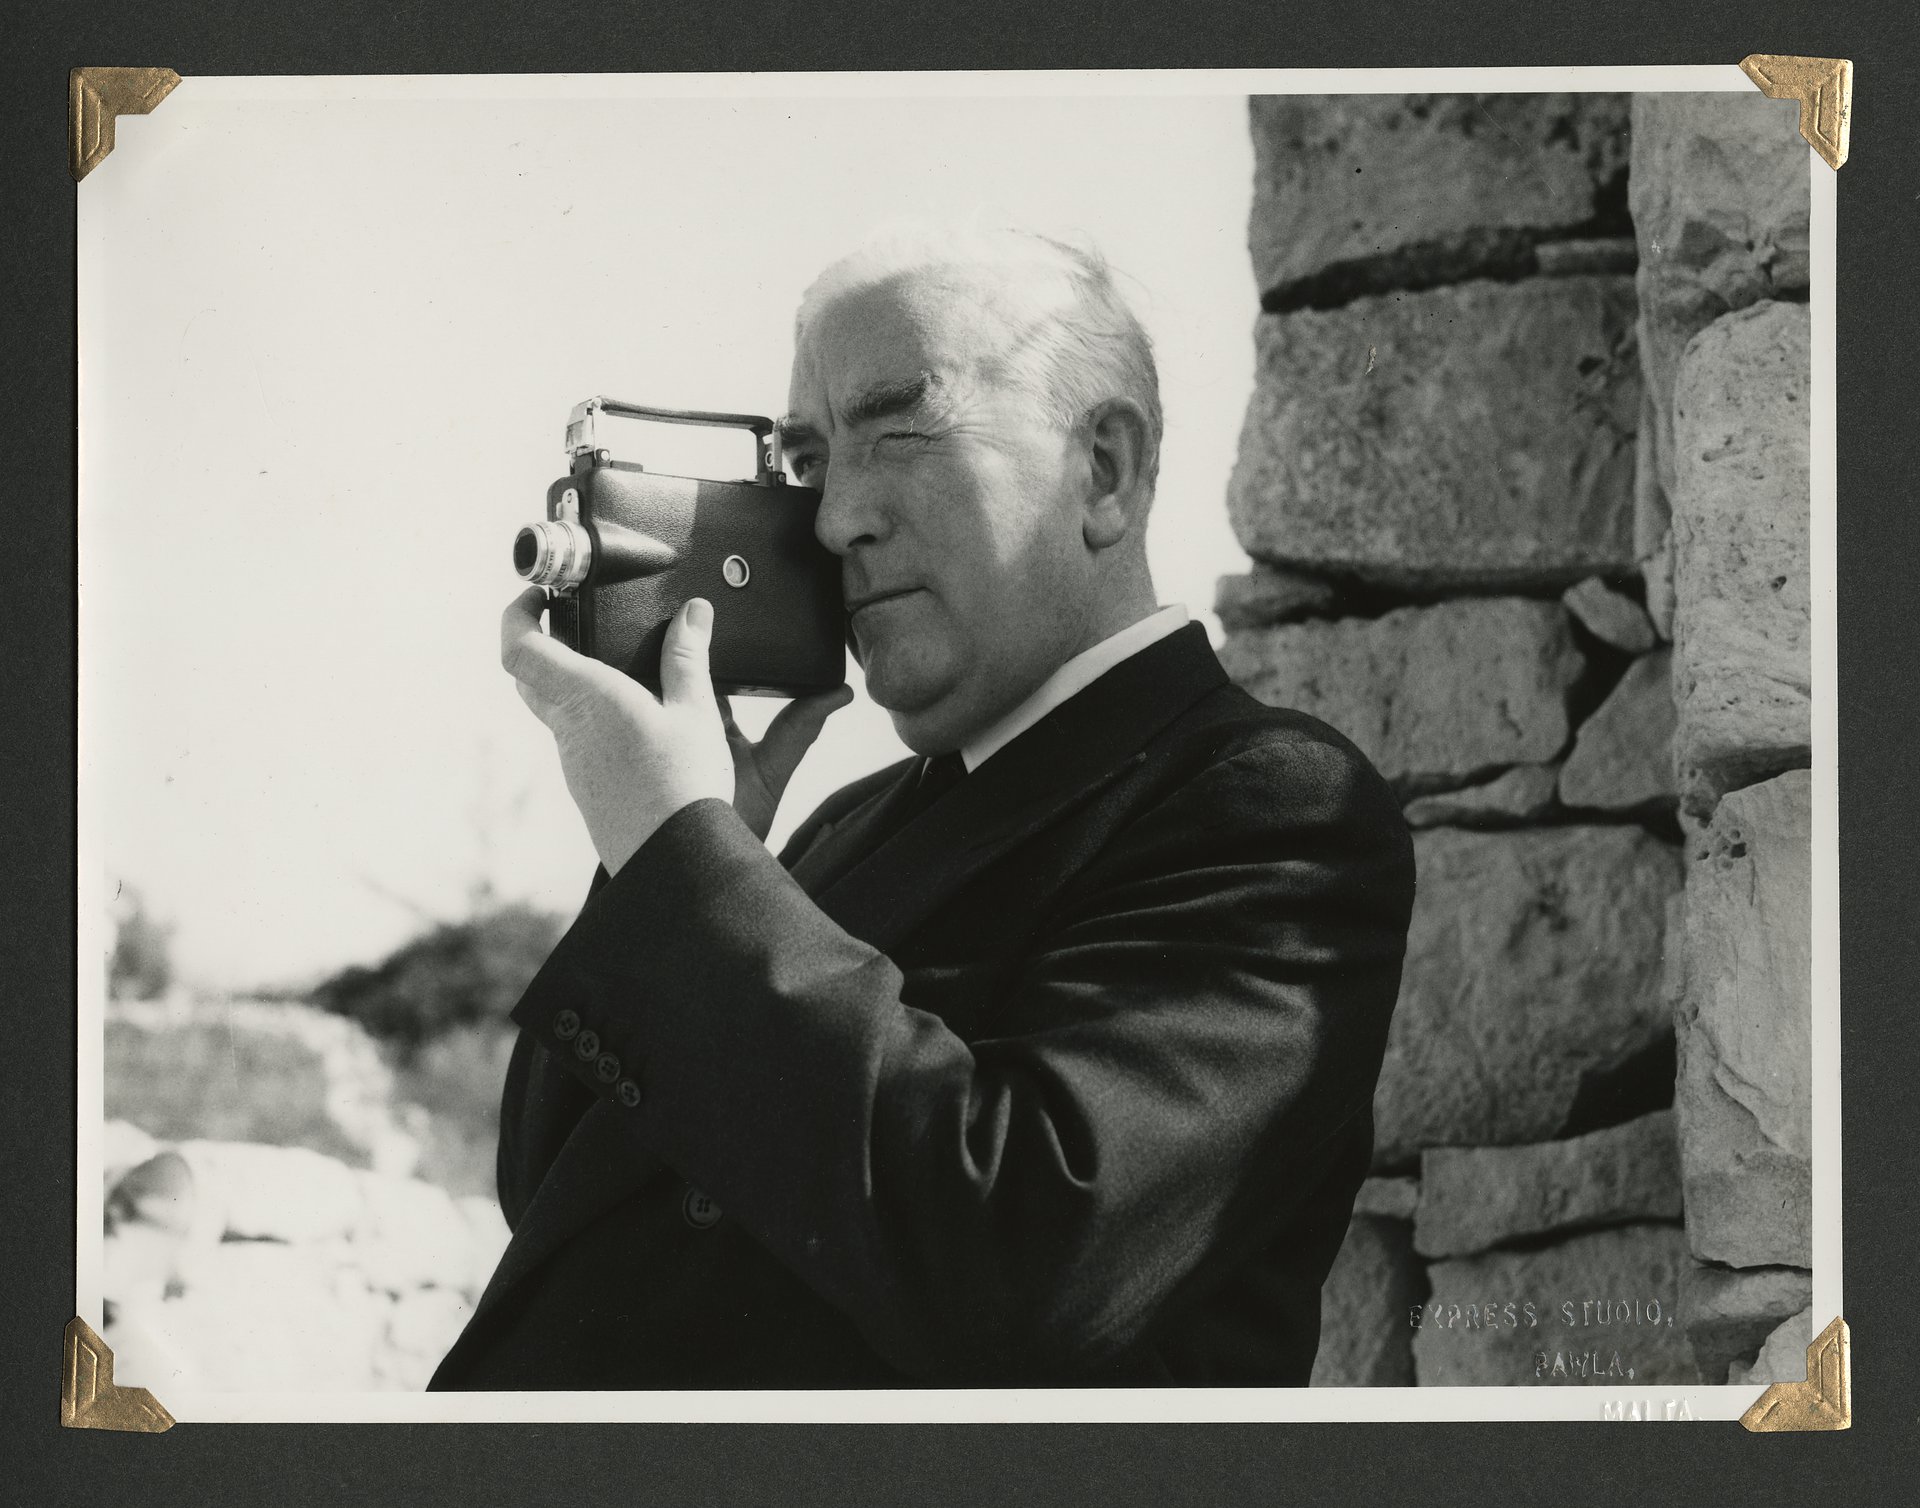 Robert Menzies filming during a visit to Malta in 1956